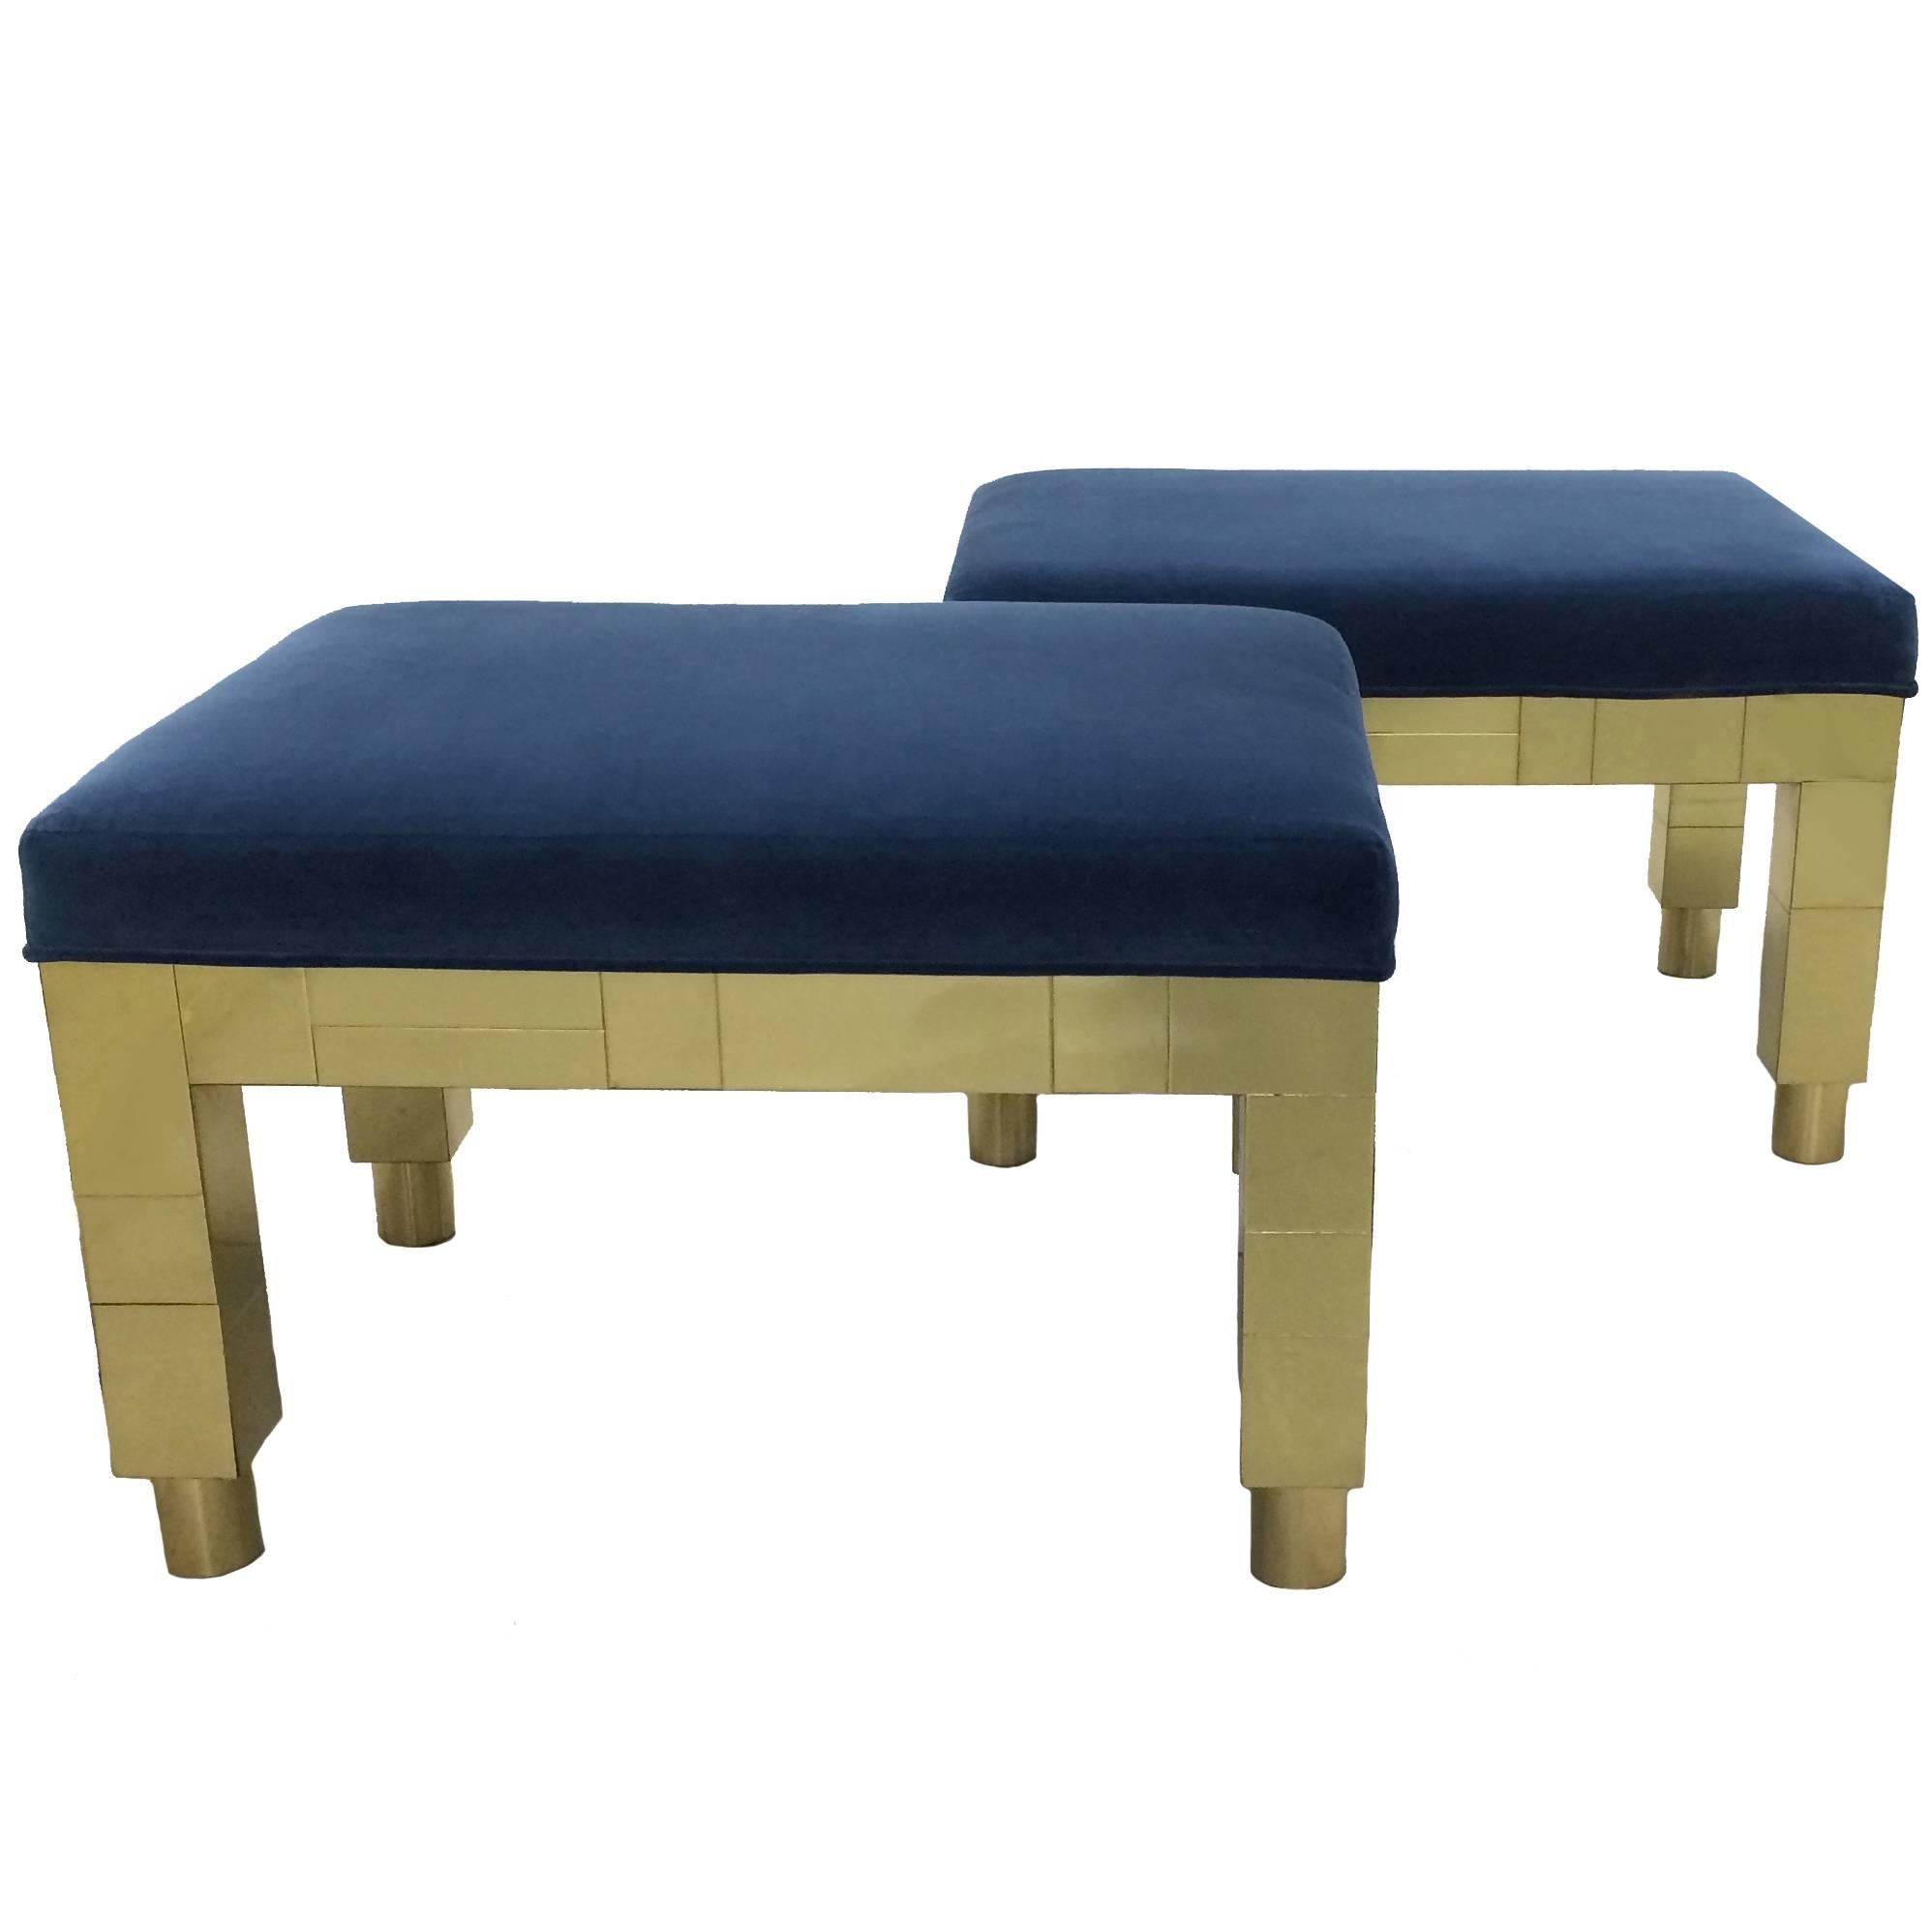 1977 Paul Evans for Directional Cityscape Brass Benches, Pair